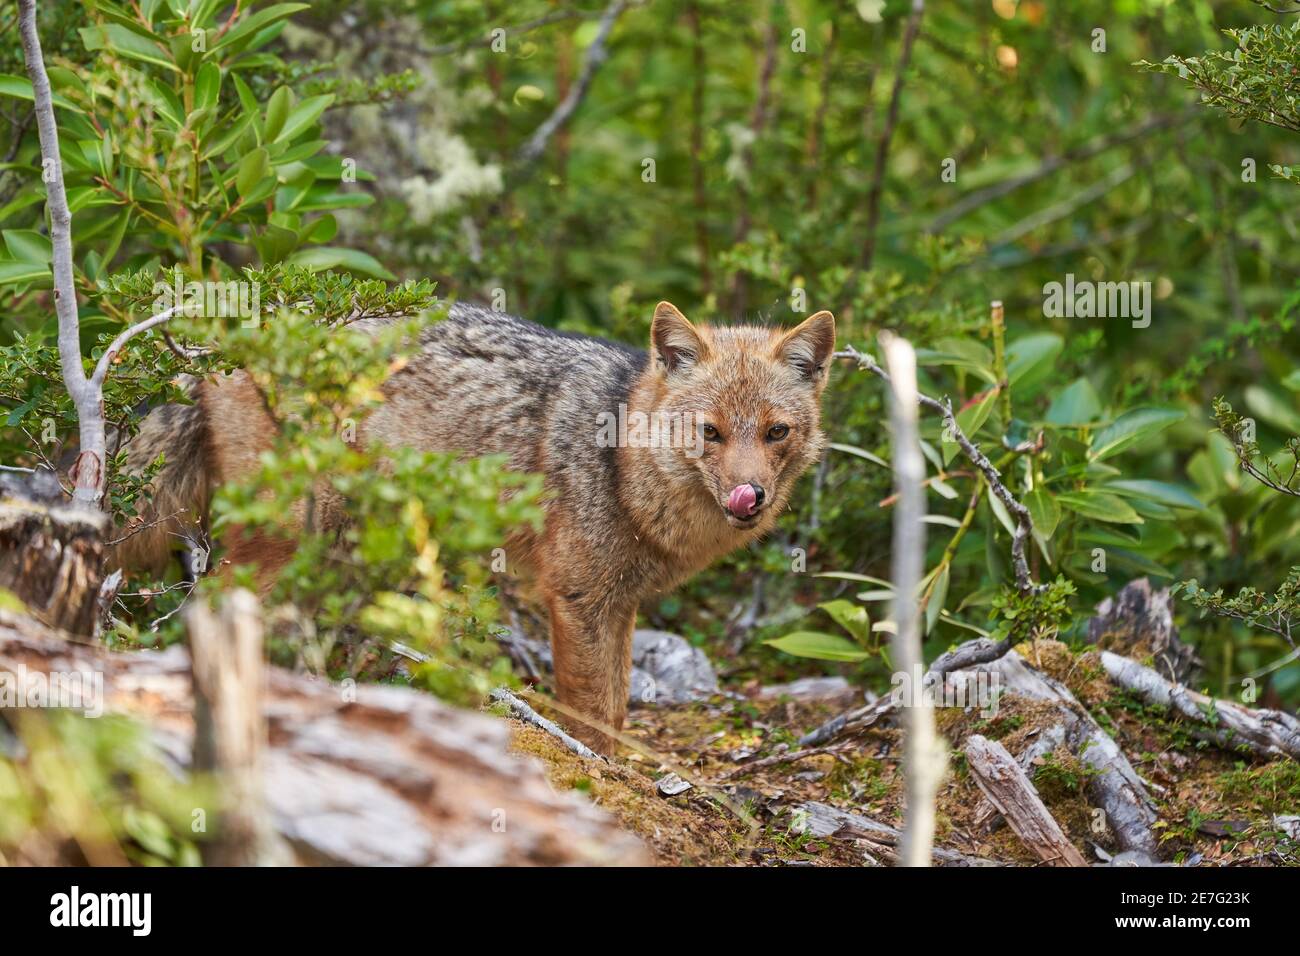 Lycalopex griseus, patagonian fox can be found on tierra del fuego, Patagonia, south america Stock Photo